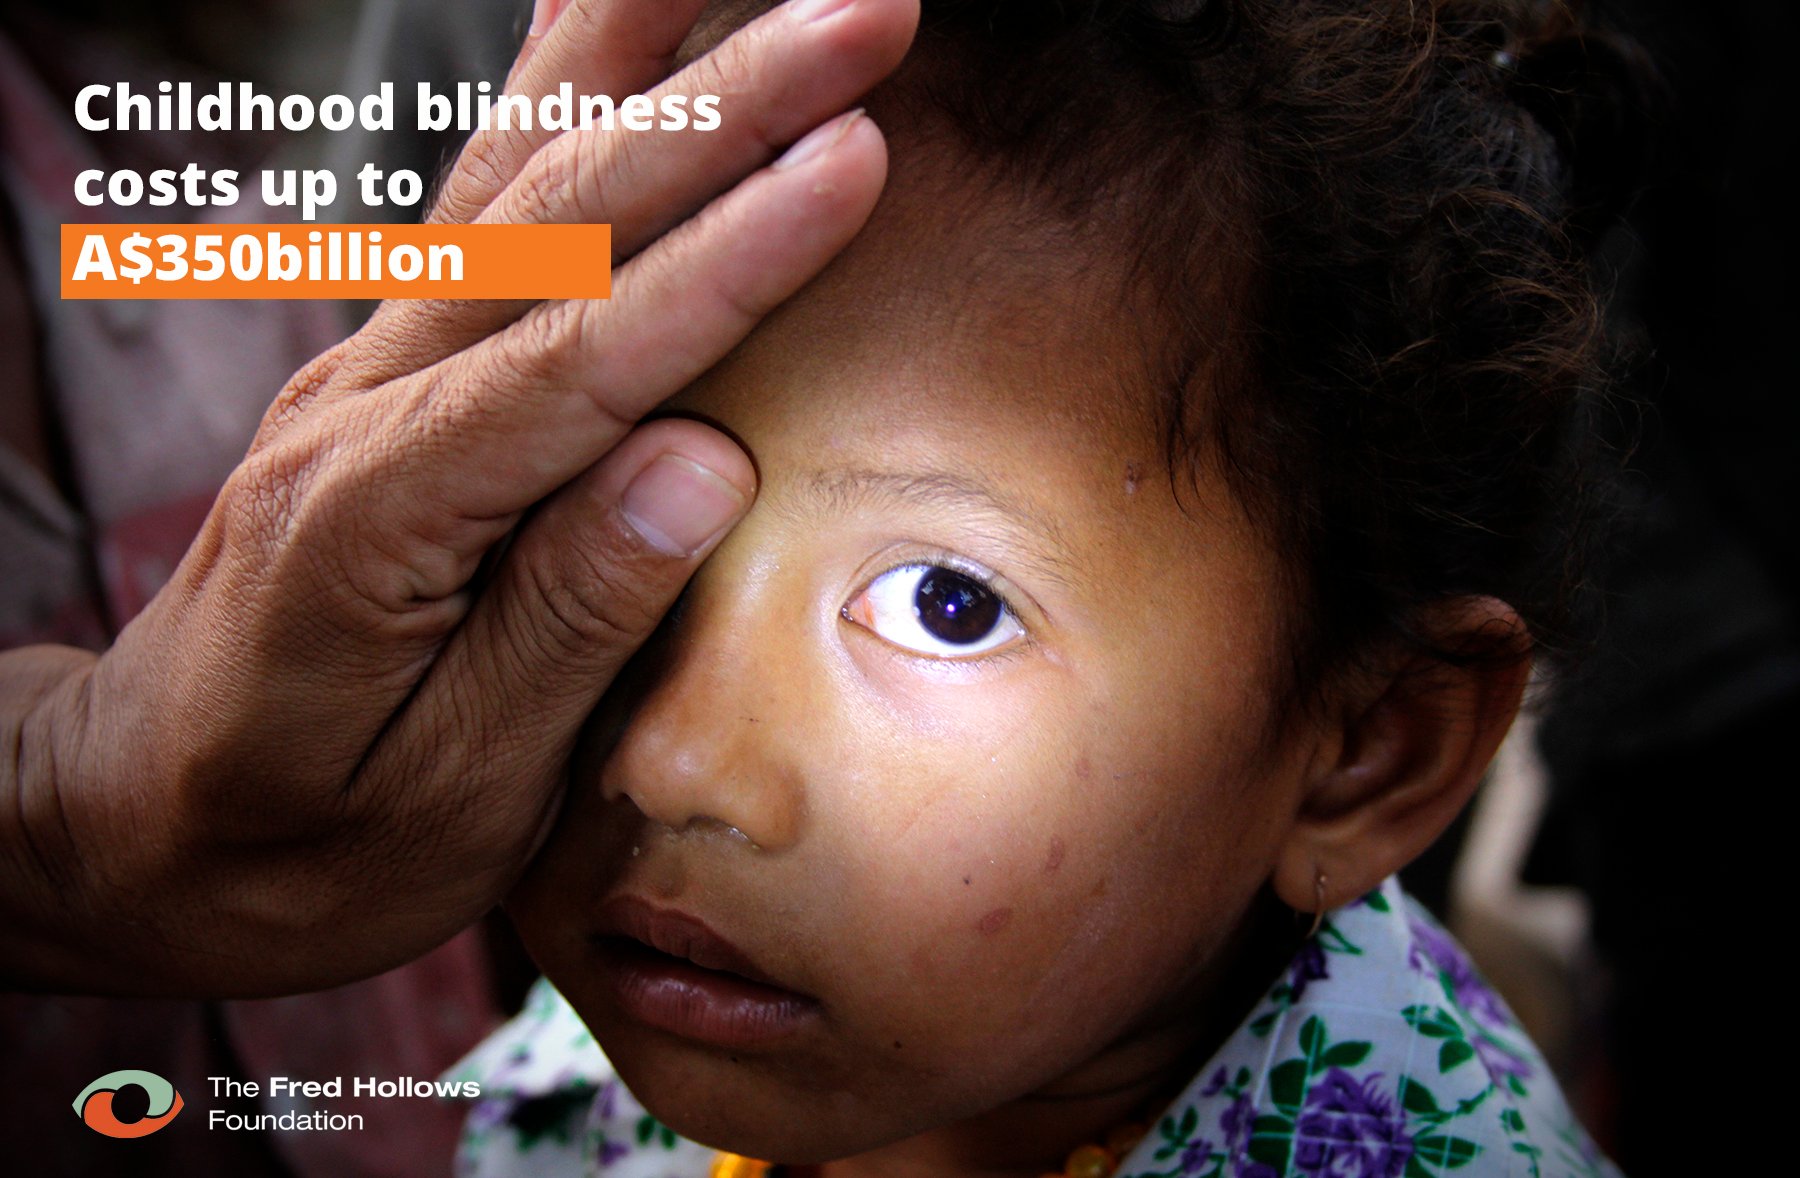 Childhood blindness costs up to $350 billion